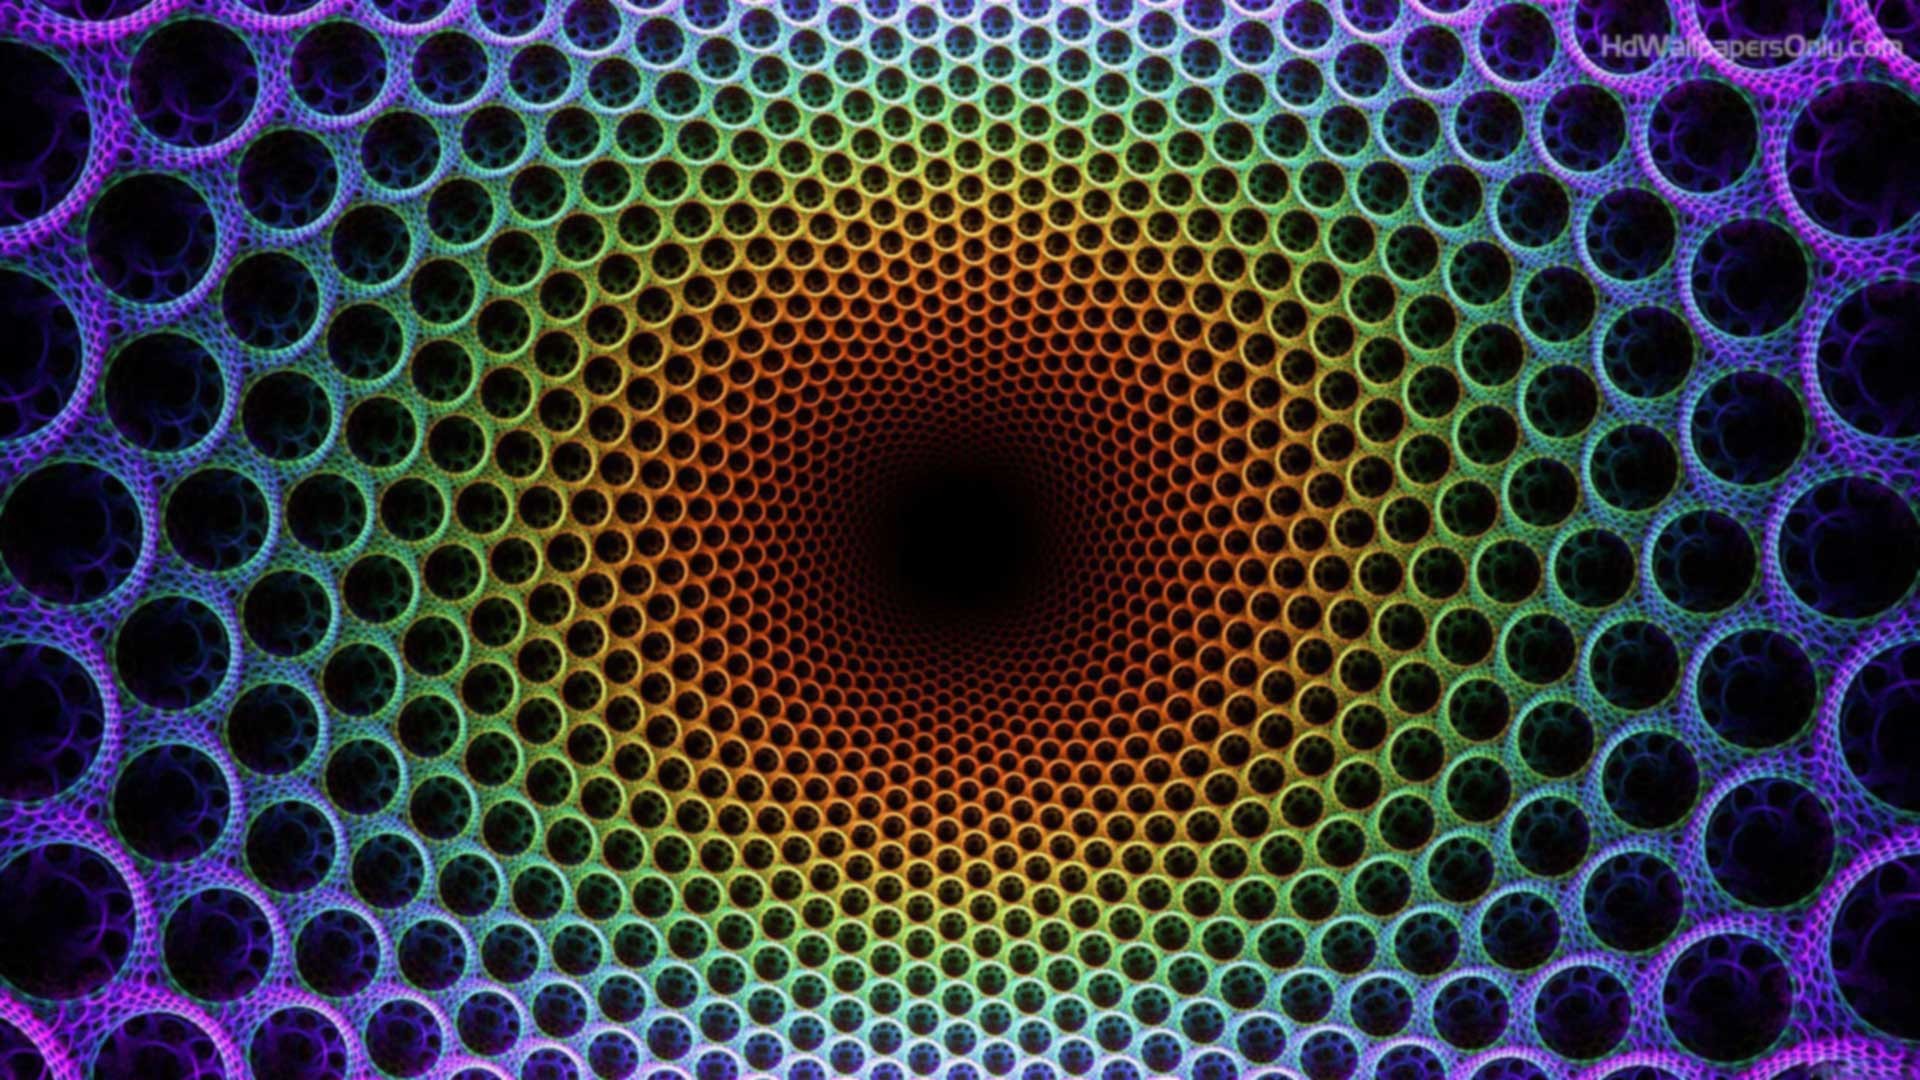 1920x1080 Optical illusions pictures for kids - Hd WallpapersHD Wallpapers Only